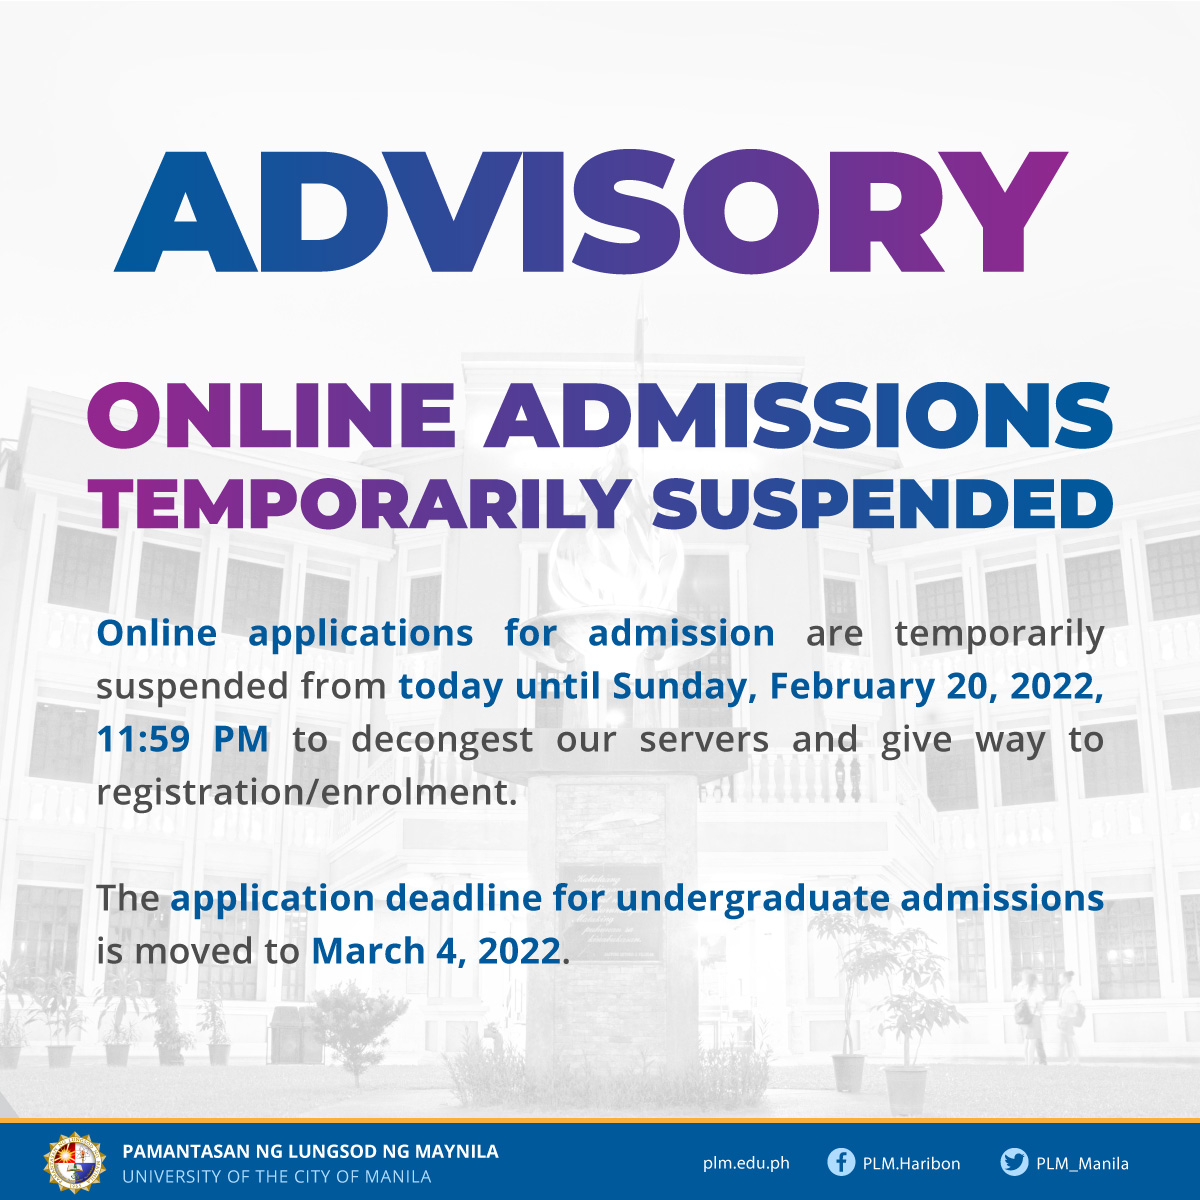 Online admissions temporarily suspended until Feb. 20, 2022